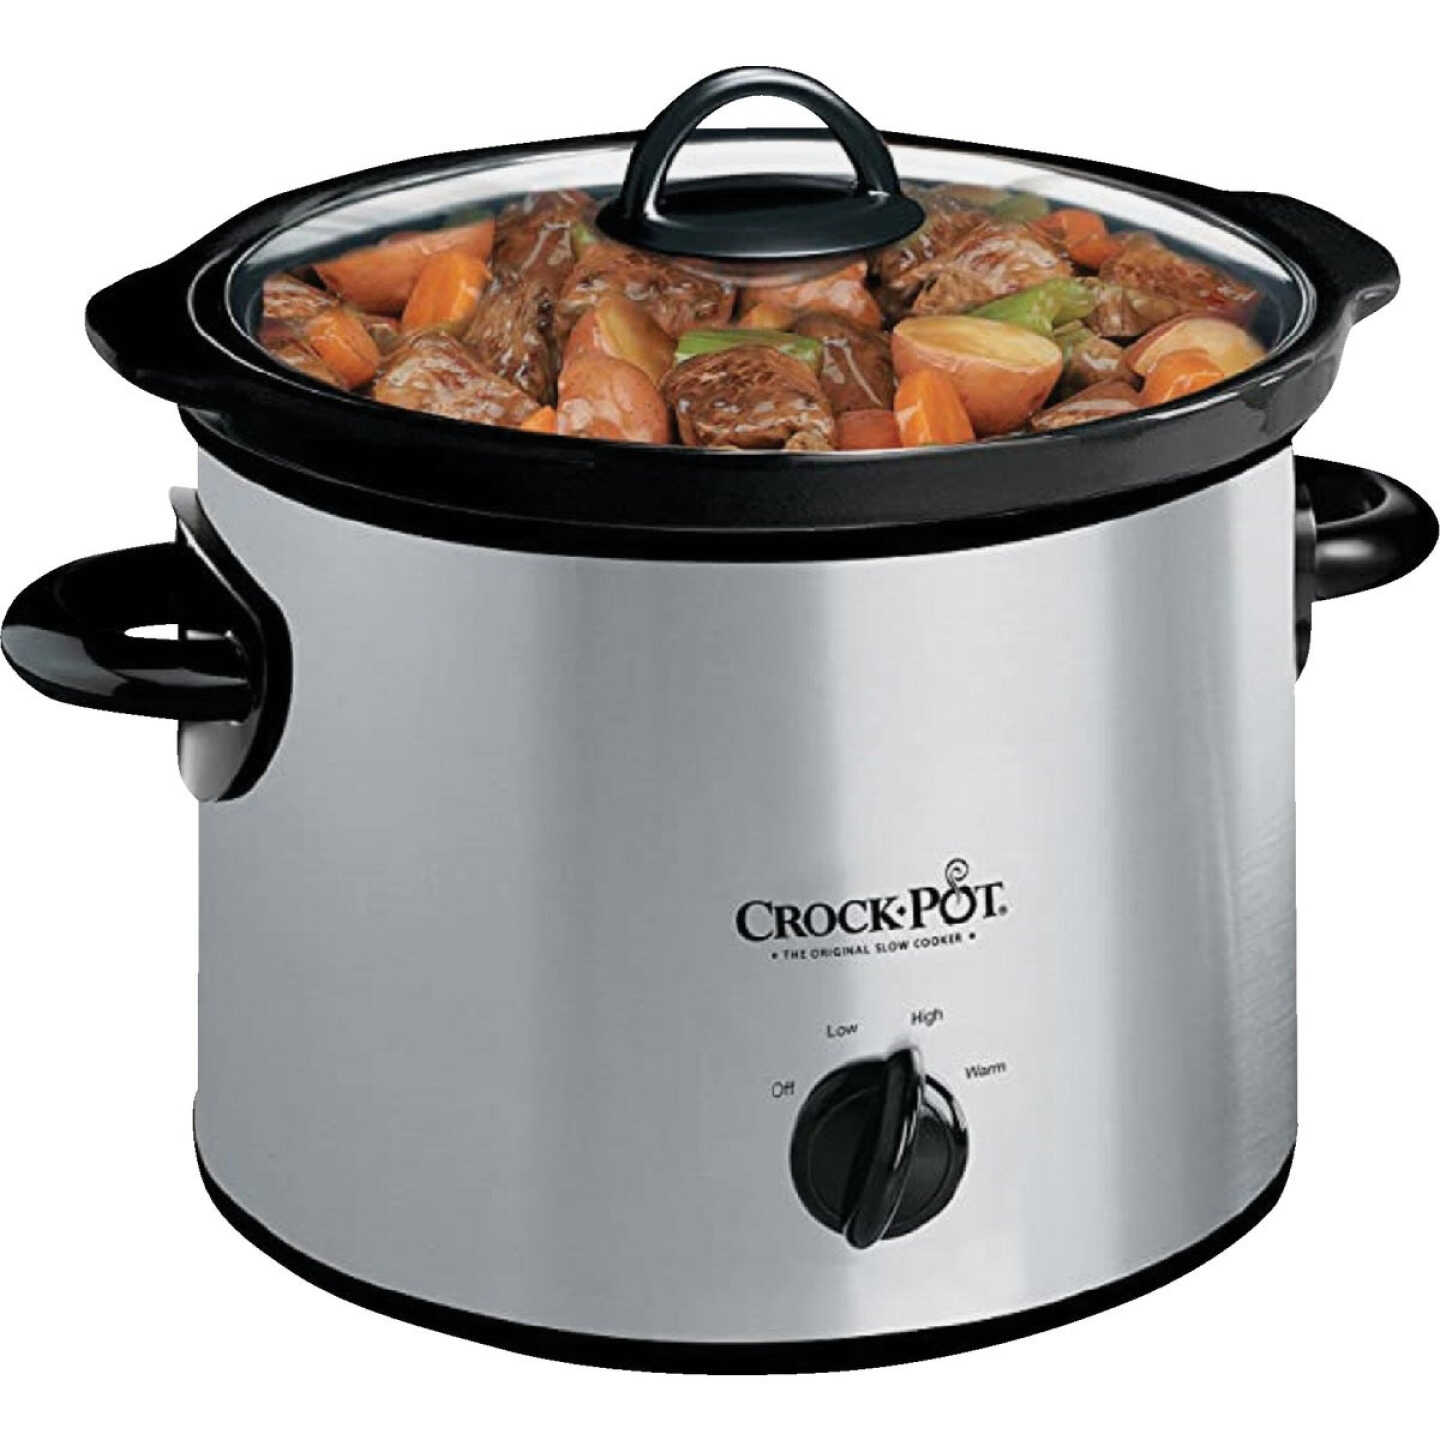 Review of the Crock-Pot 2-Quart Round Manual Slow Cooker+ 